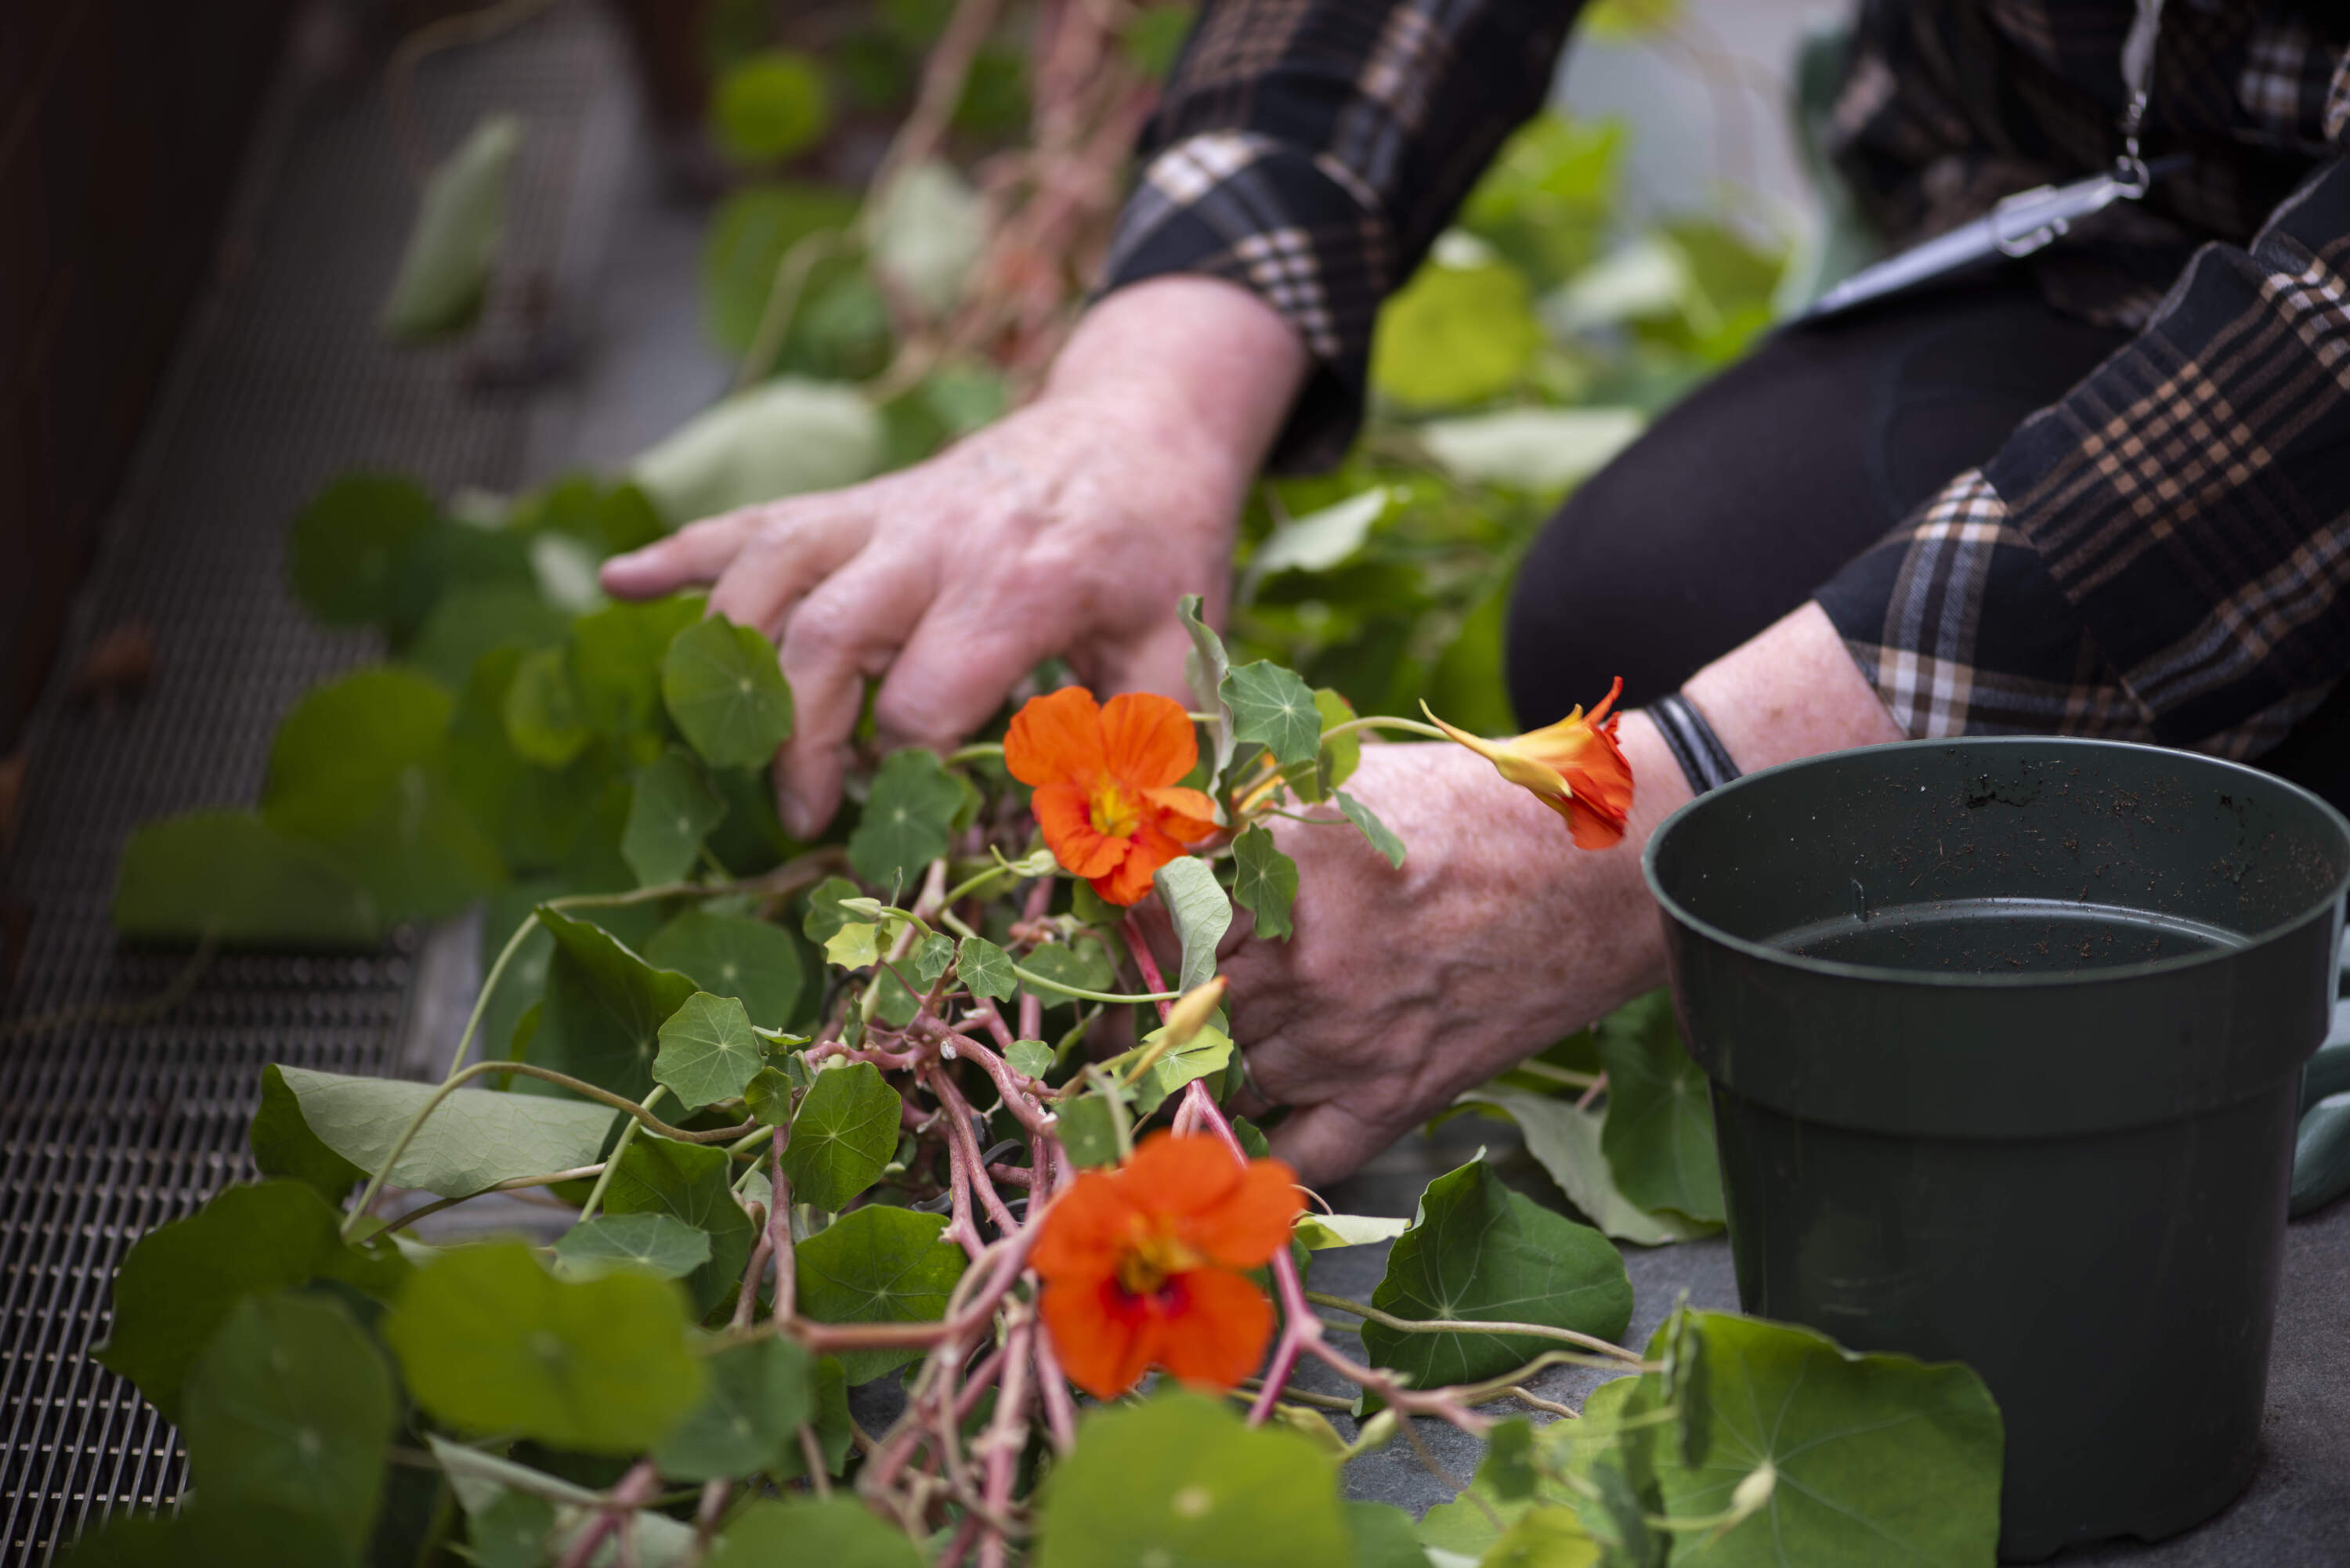 Bright orange nasturtium flowers like this one are what horticulturists strive to cultivate. (Photo courtesy of the Isabella Stewart Gardner Museum)